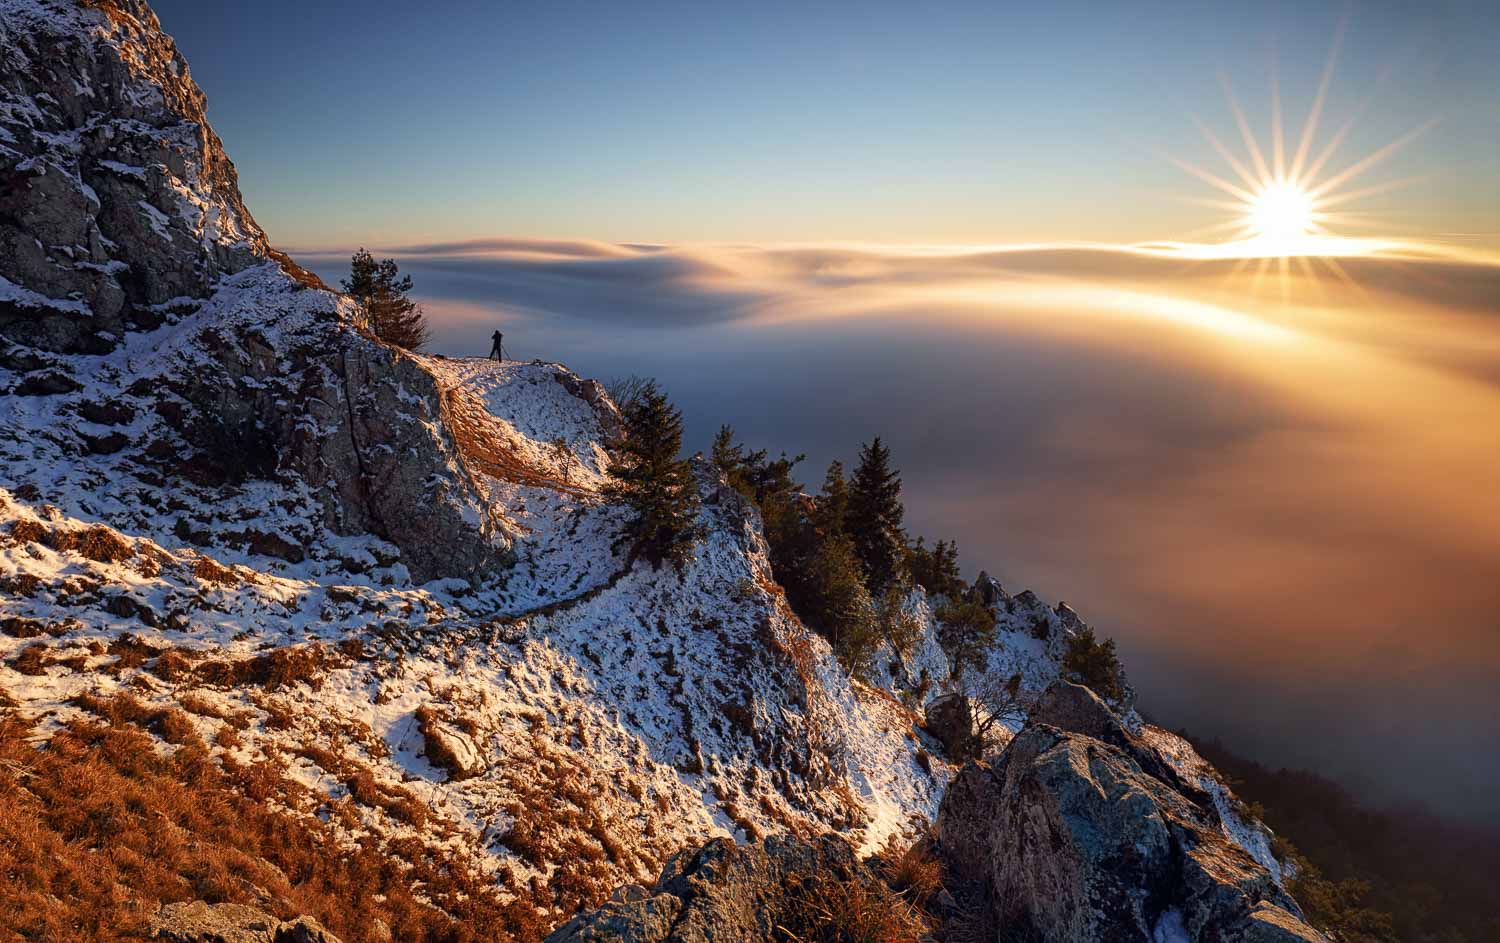 Hiker standing on a snowy mountain trail at sunset, with sea of clouds below.